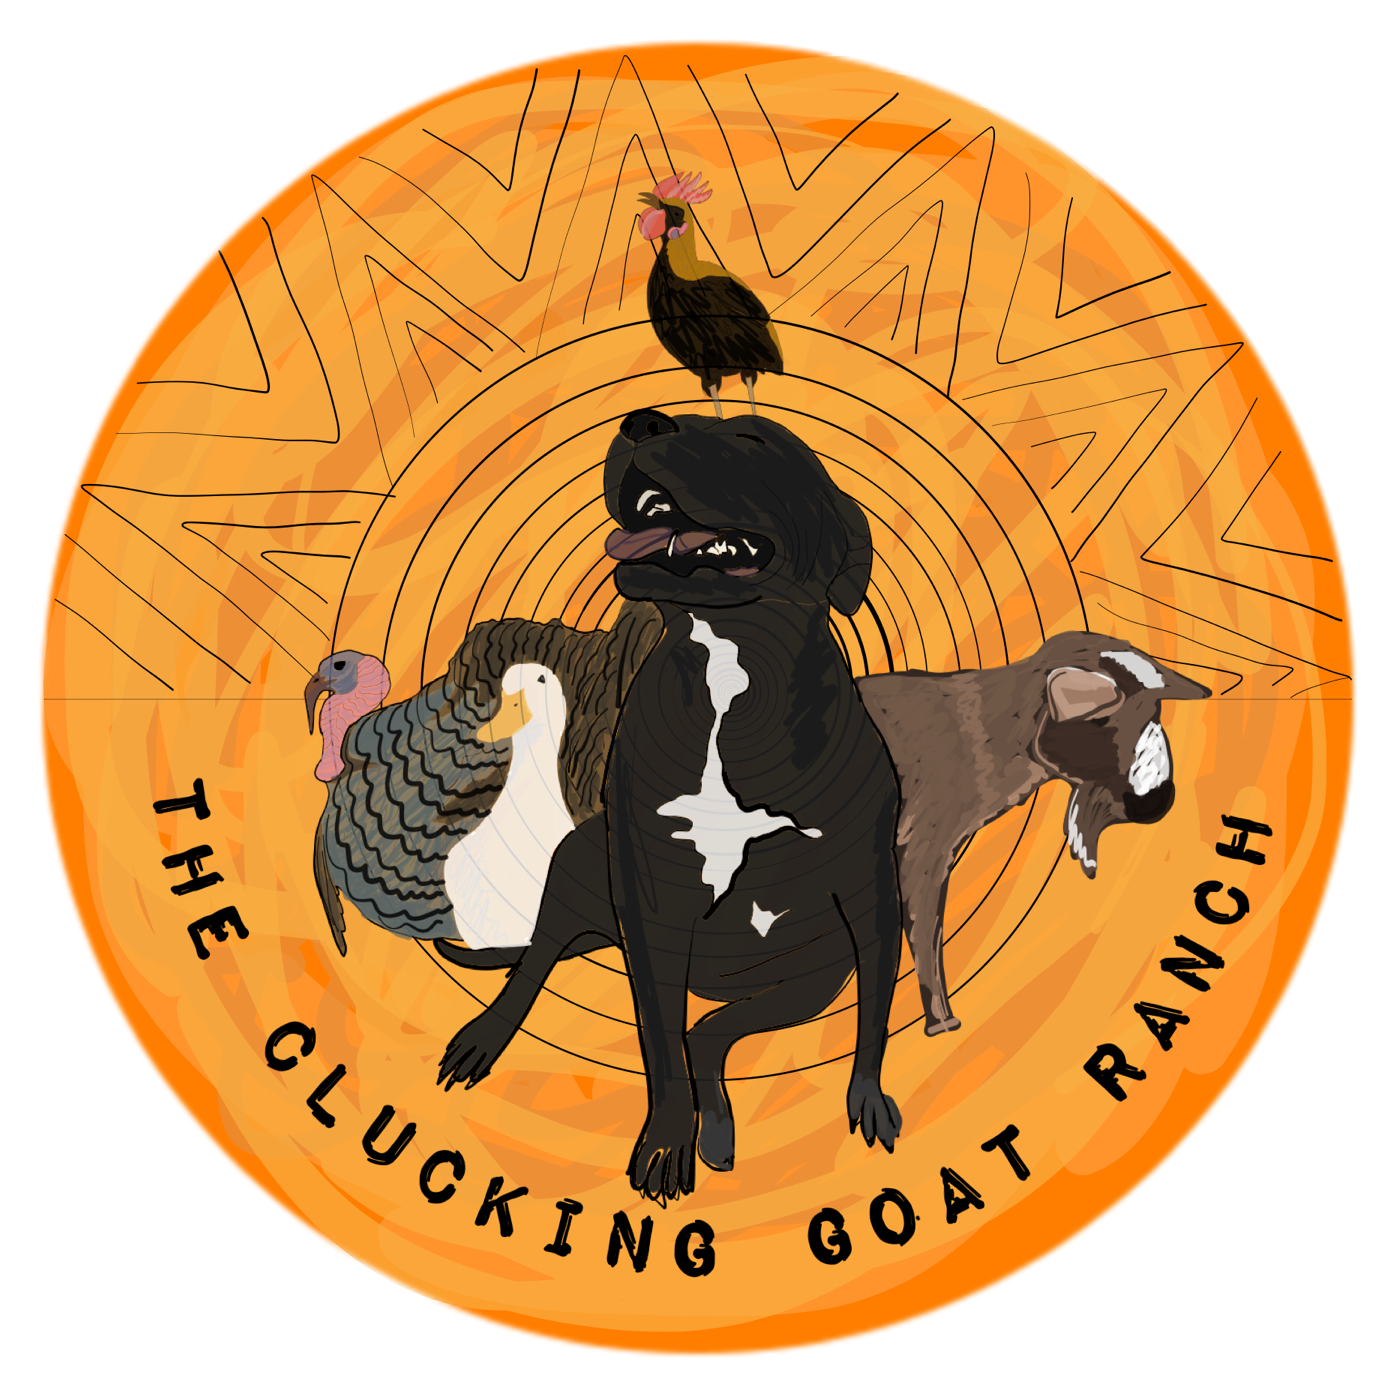 The Clucking Goat